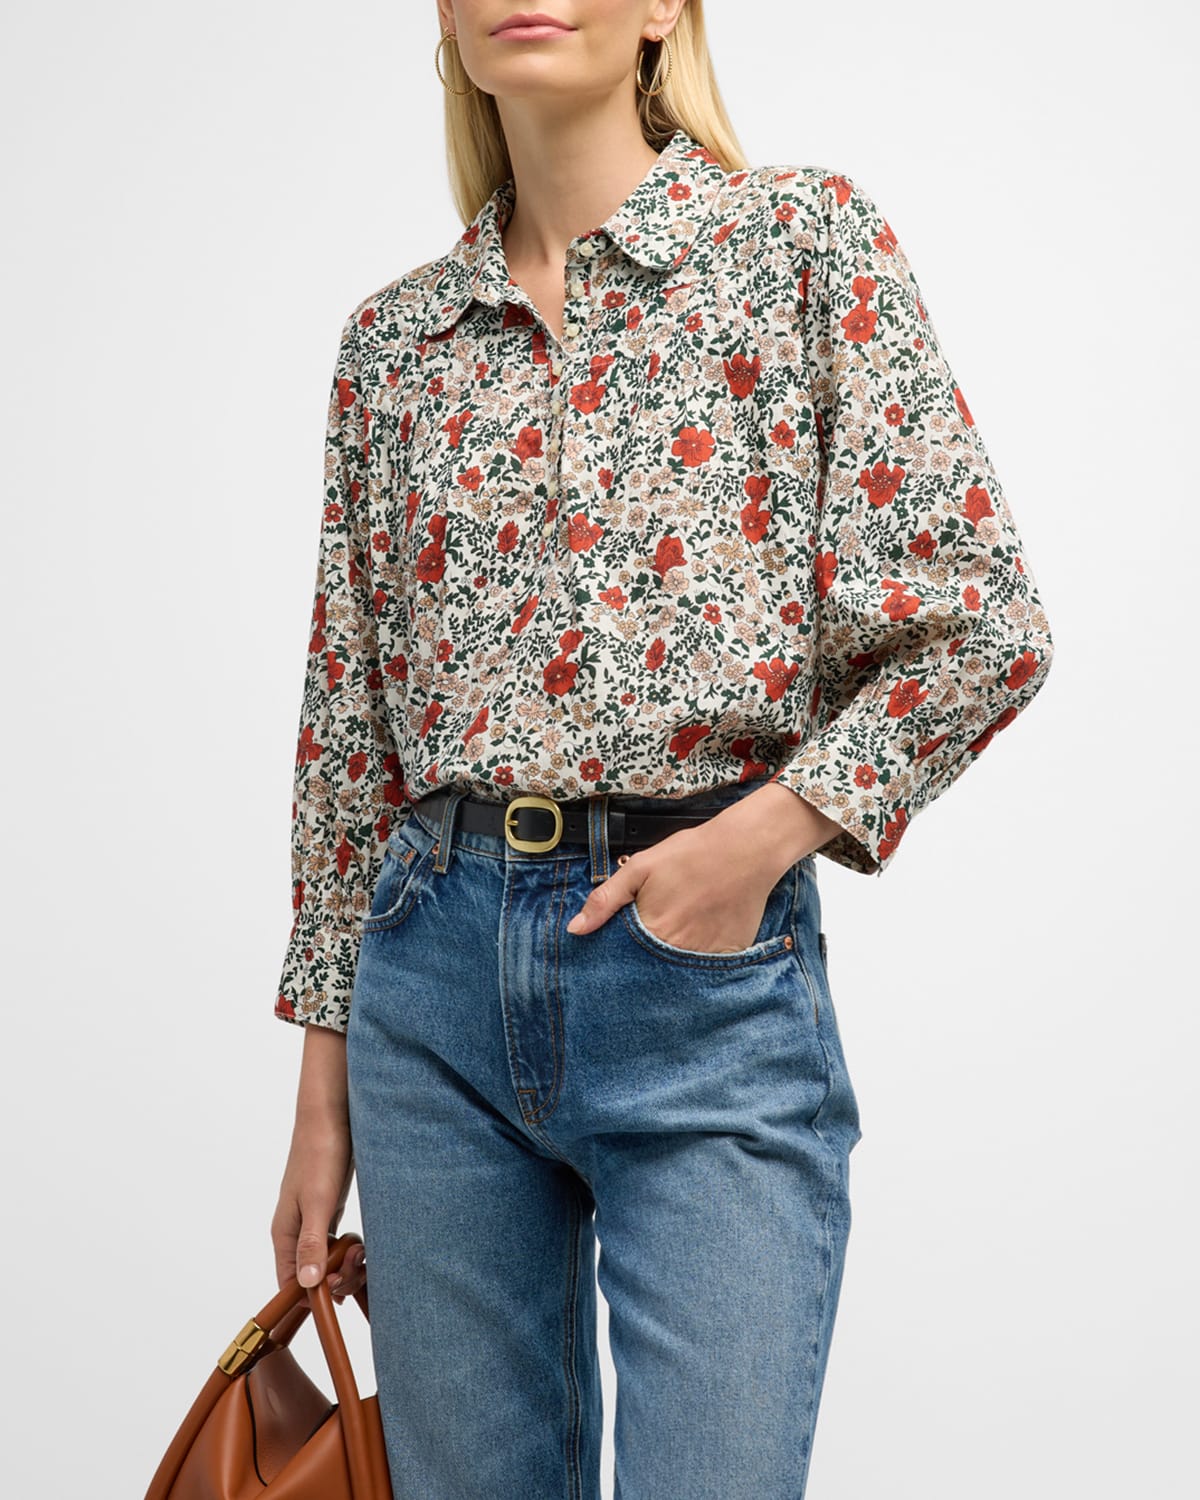 THE GREAT. The Summit Top in Cream Mesa Floral